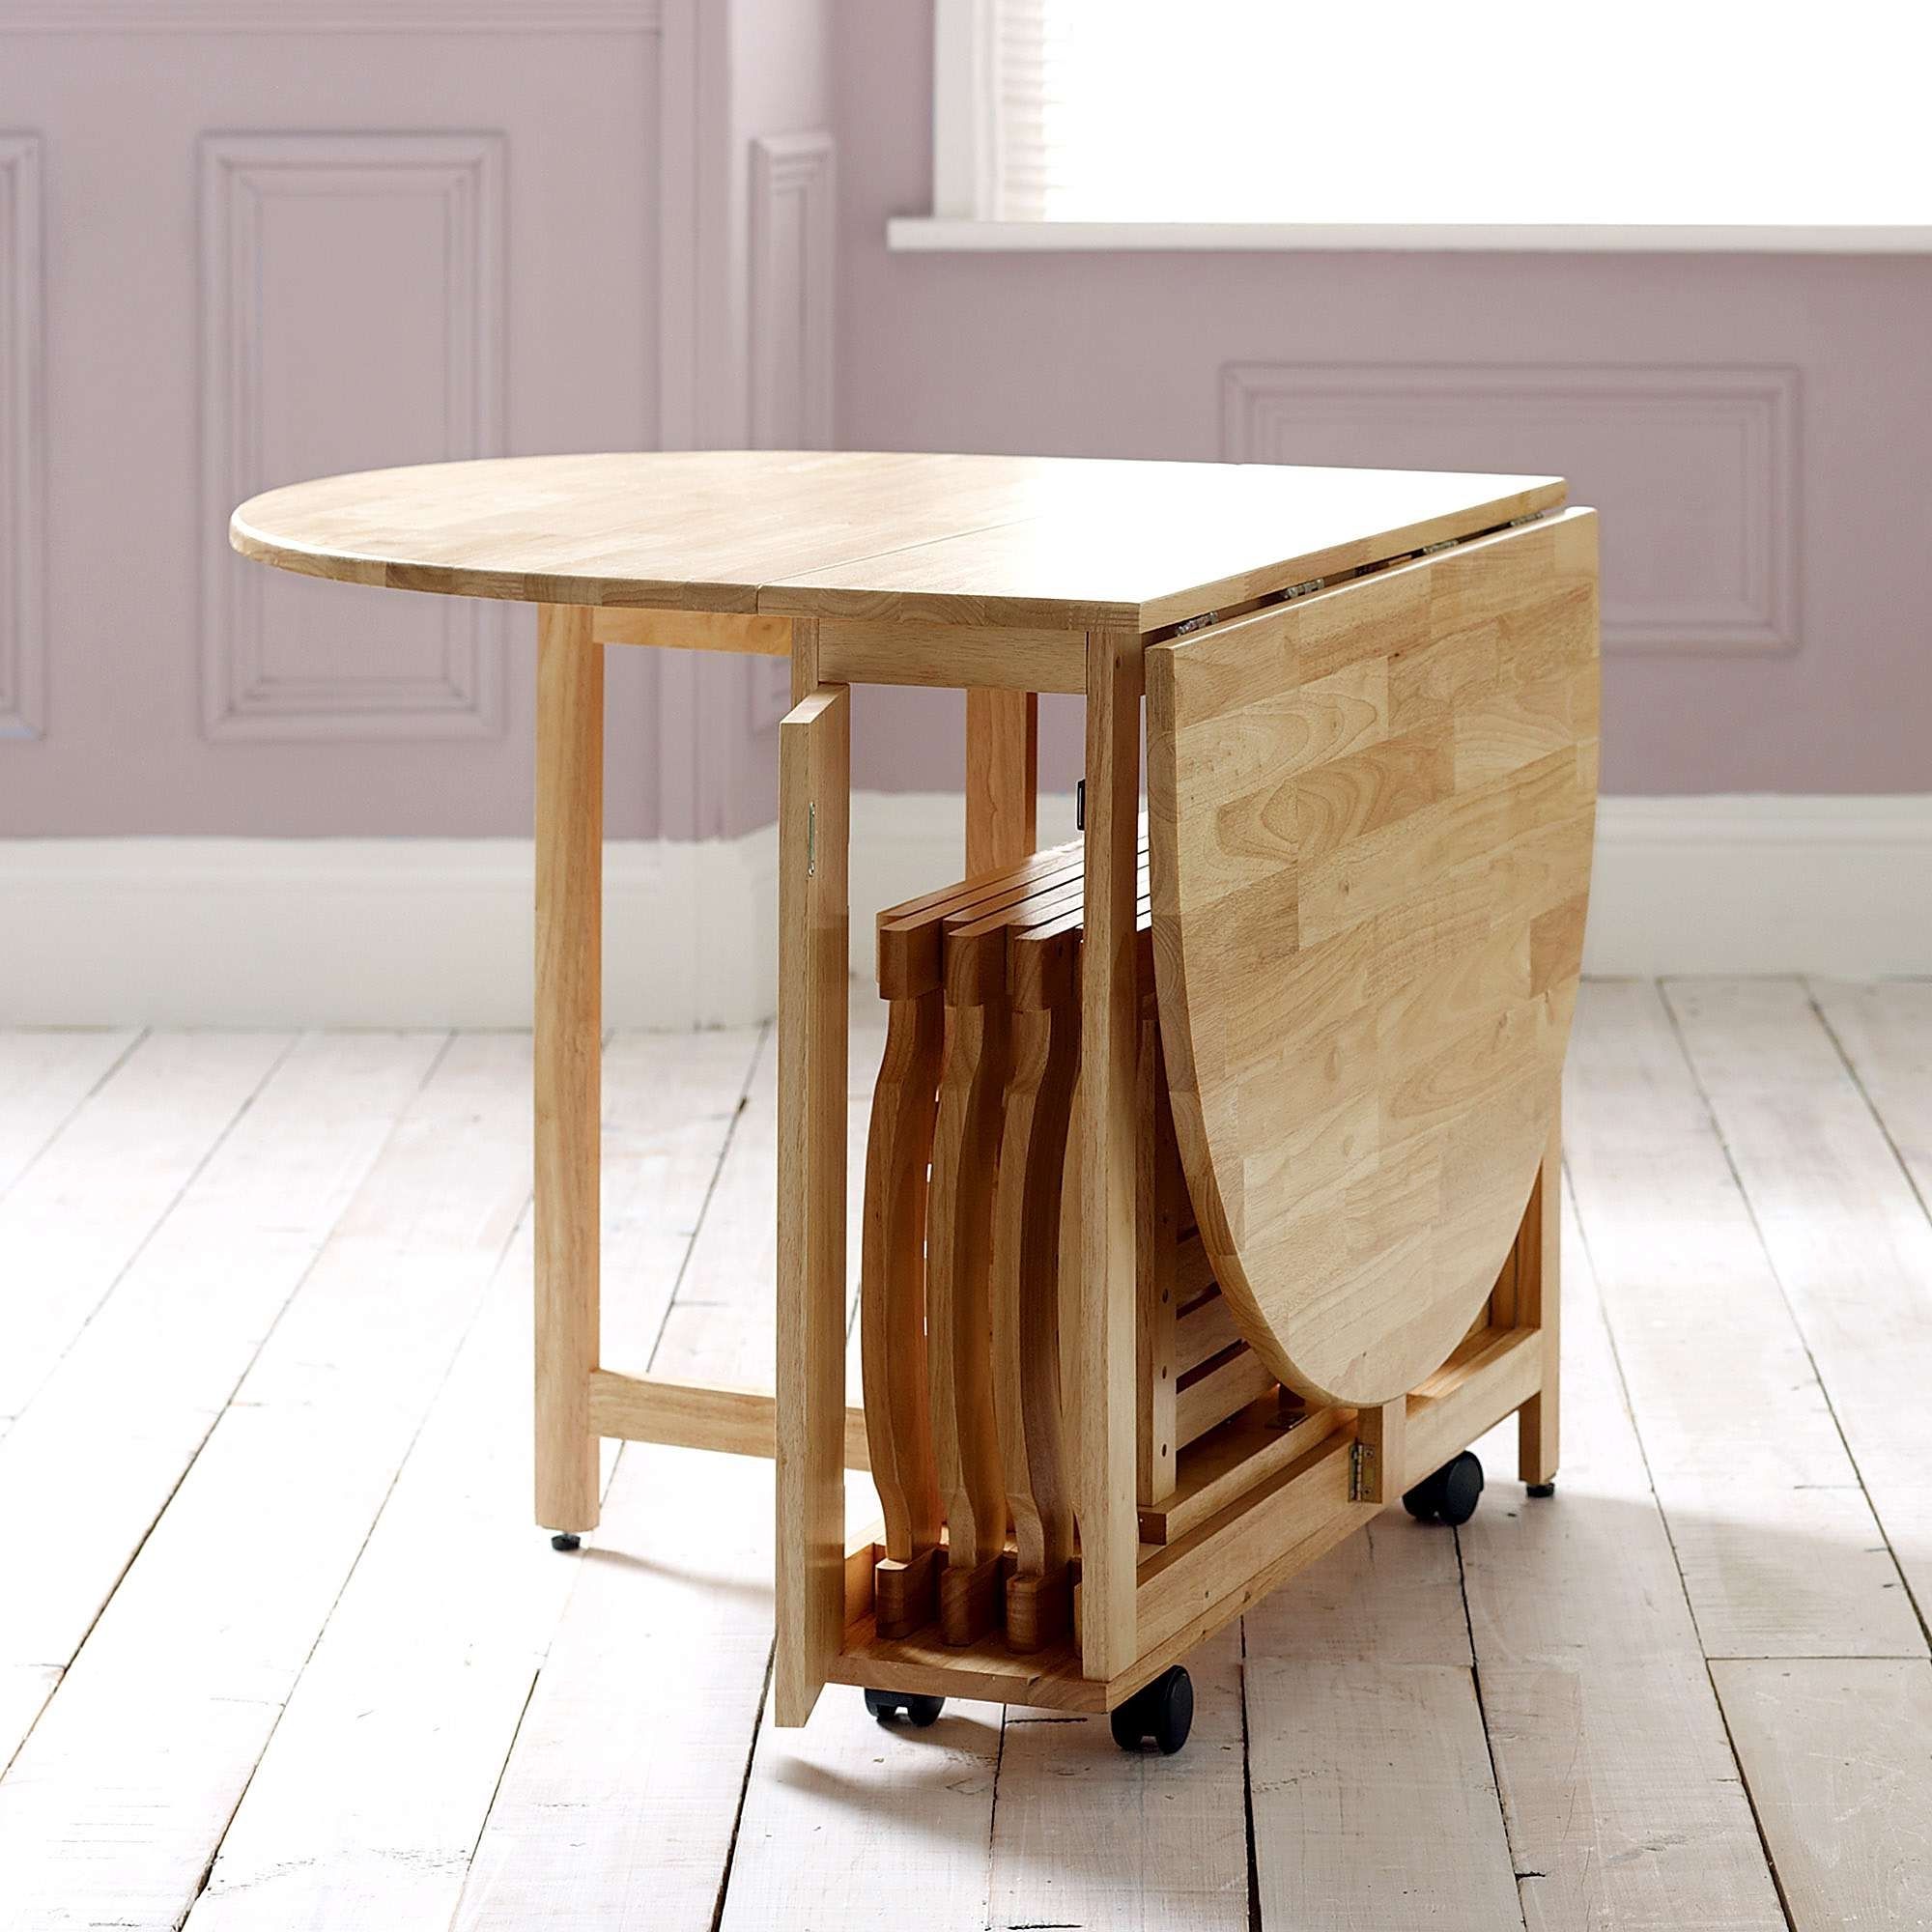 Newest Choose A Folding Dining Table For A Small Space – Adorable Home Within Oval Folding Dining Tables (View 1 of 25)